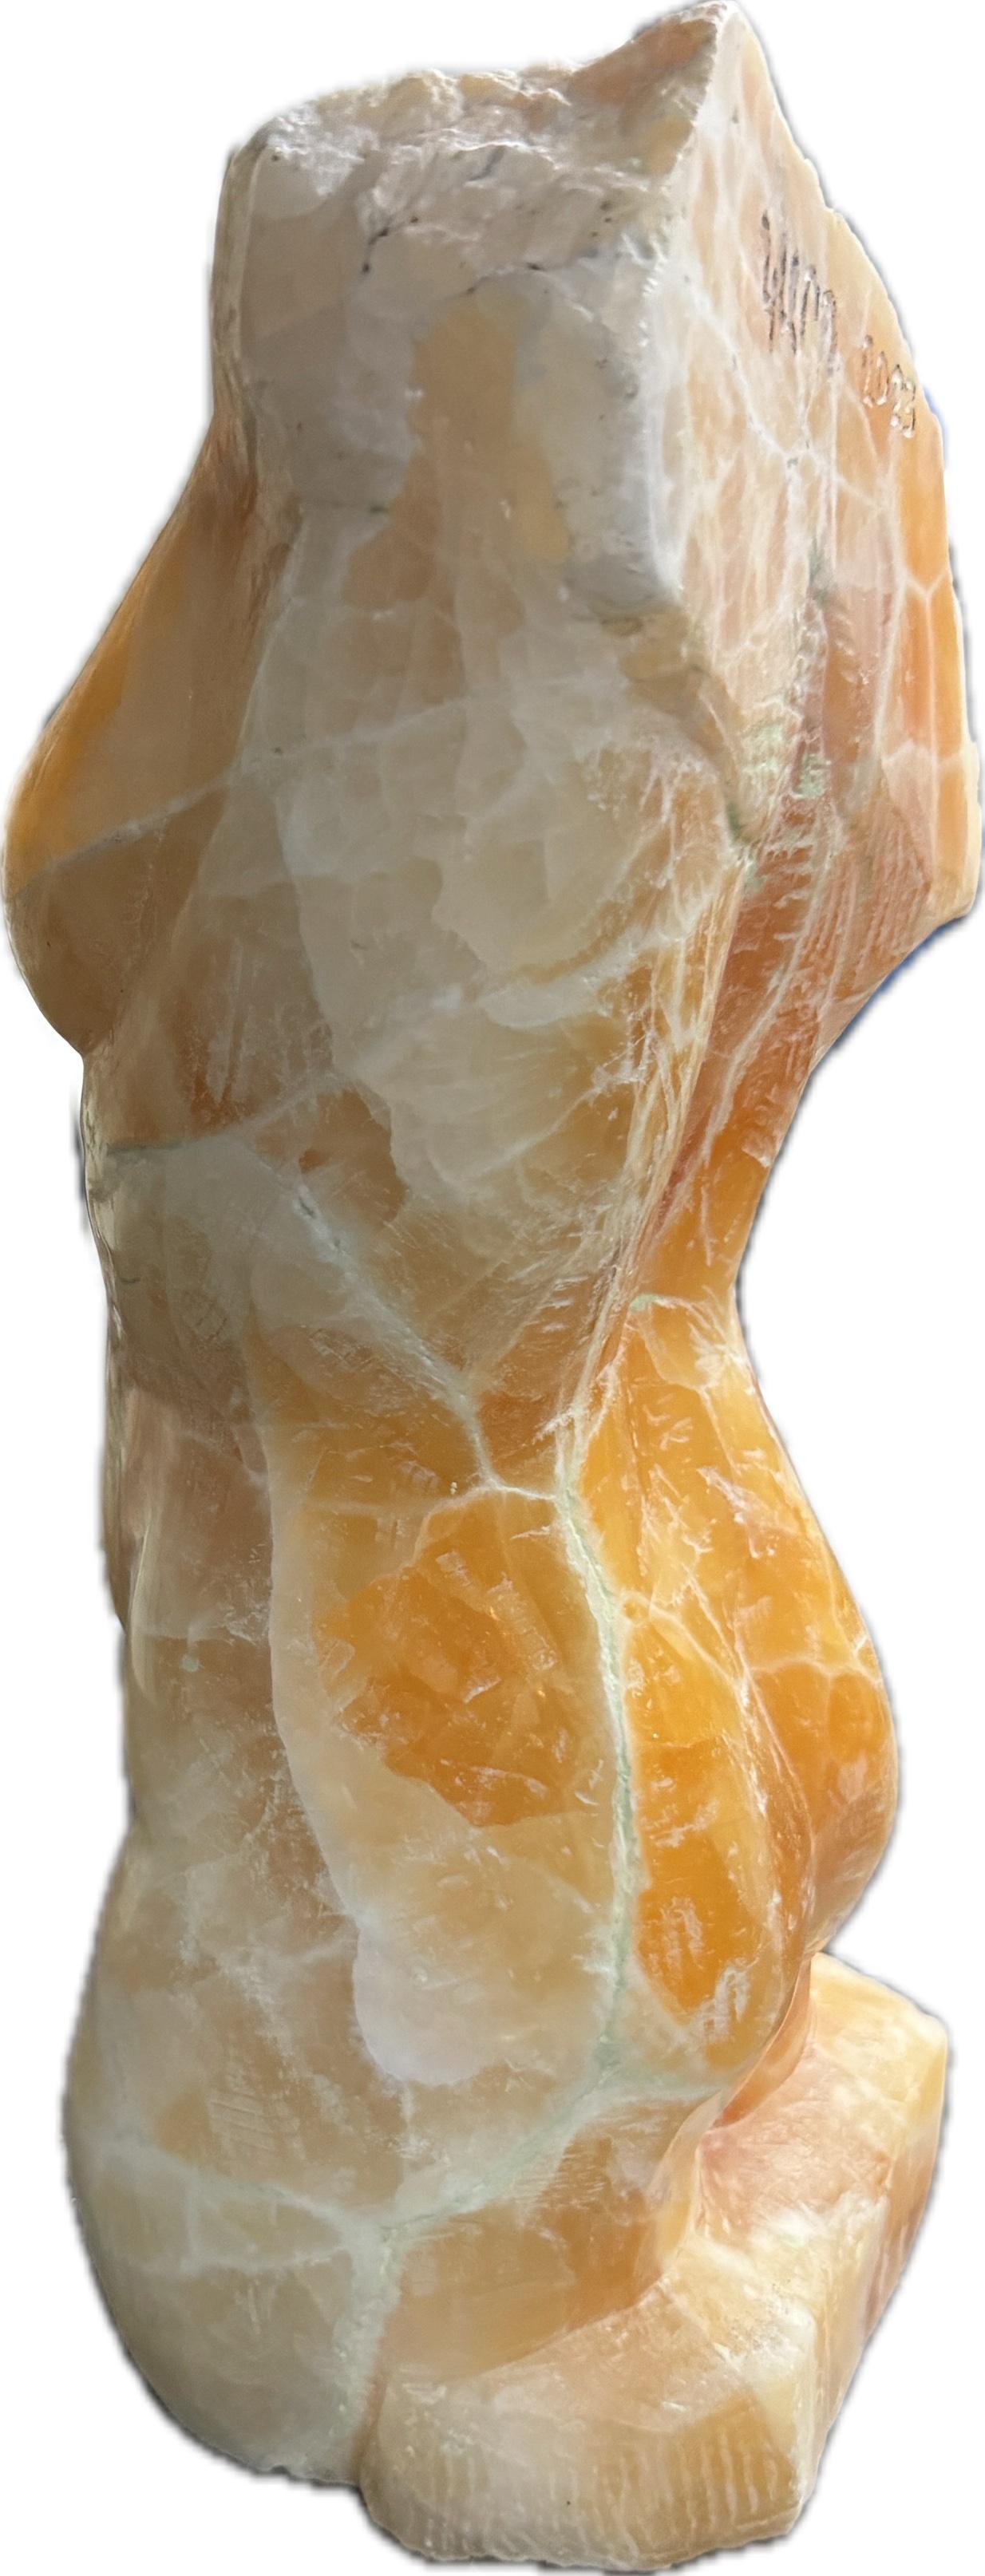 Nude, Sculpture, Natural Haney Onyx Stone, Handmade by Garo For Sale 2